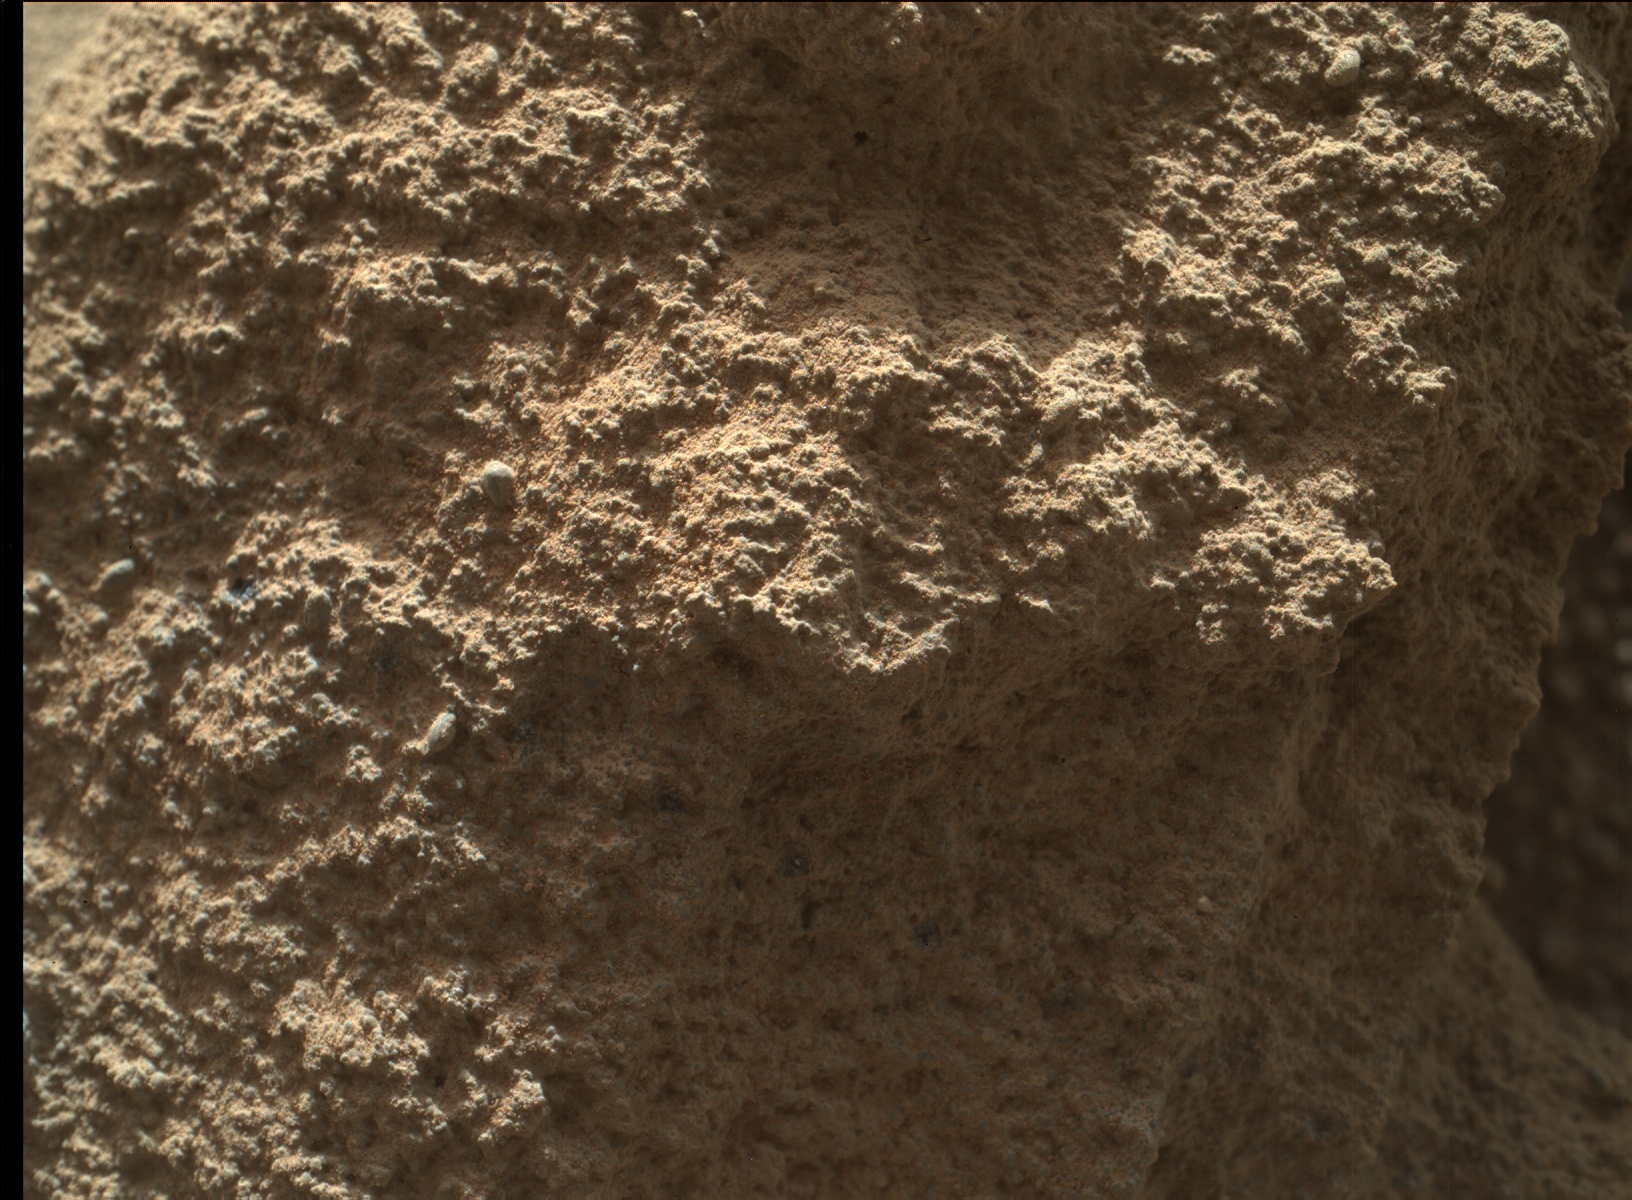 Nasa's Mars rover Curiosity acquired this image using its Mars Hand Lens Imager (MAHLI) on Sol 1293